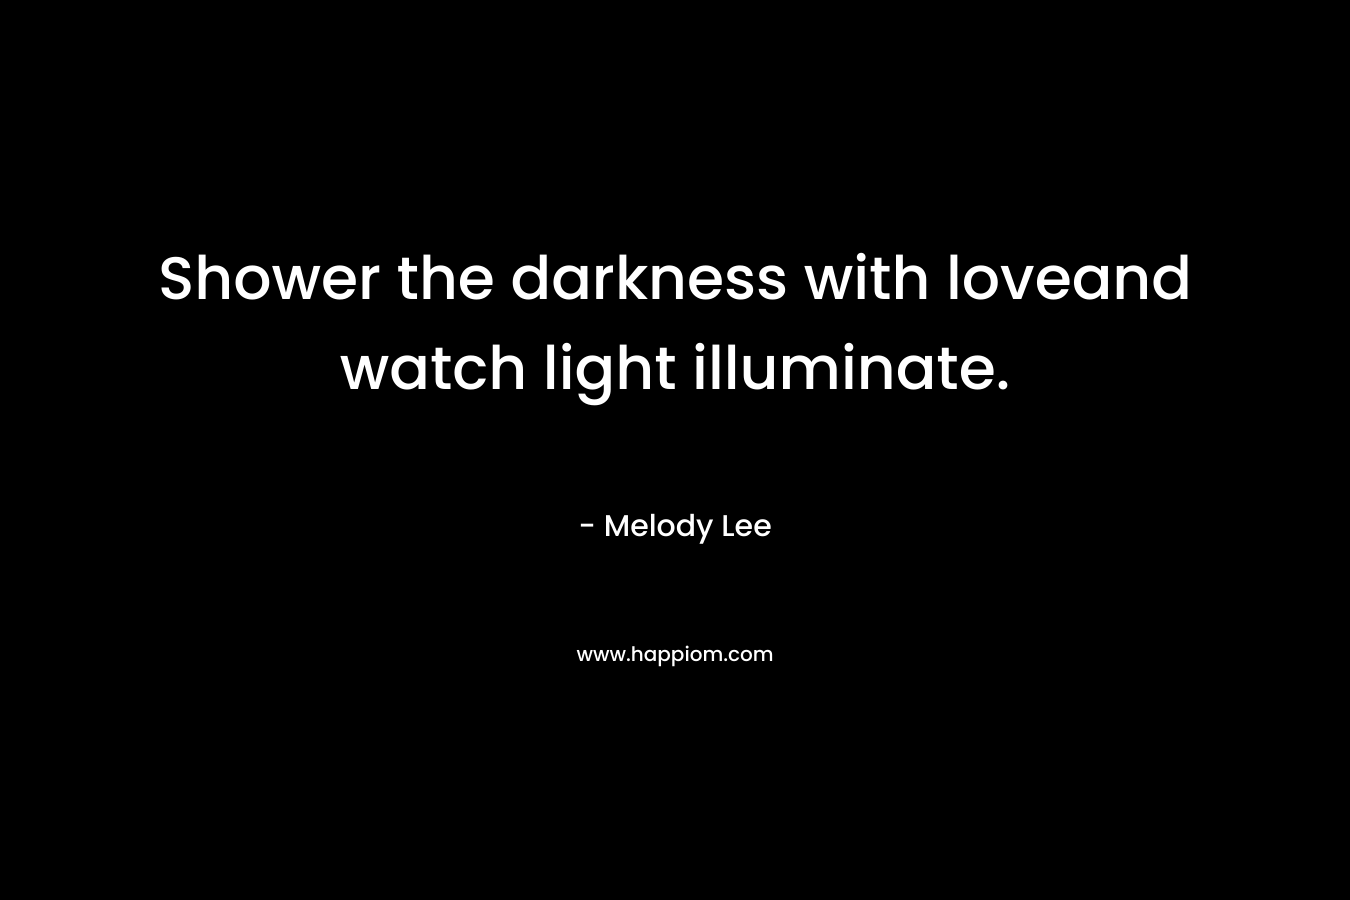 Shower the darkness with loveand watch light illuminate.